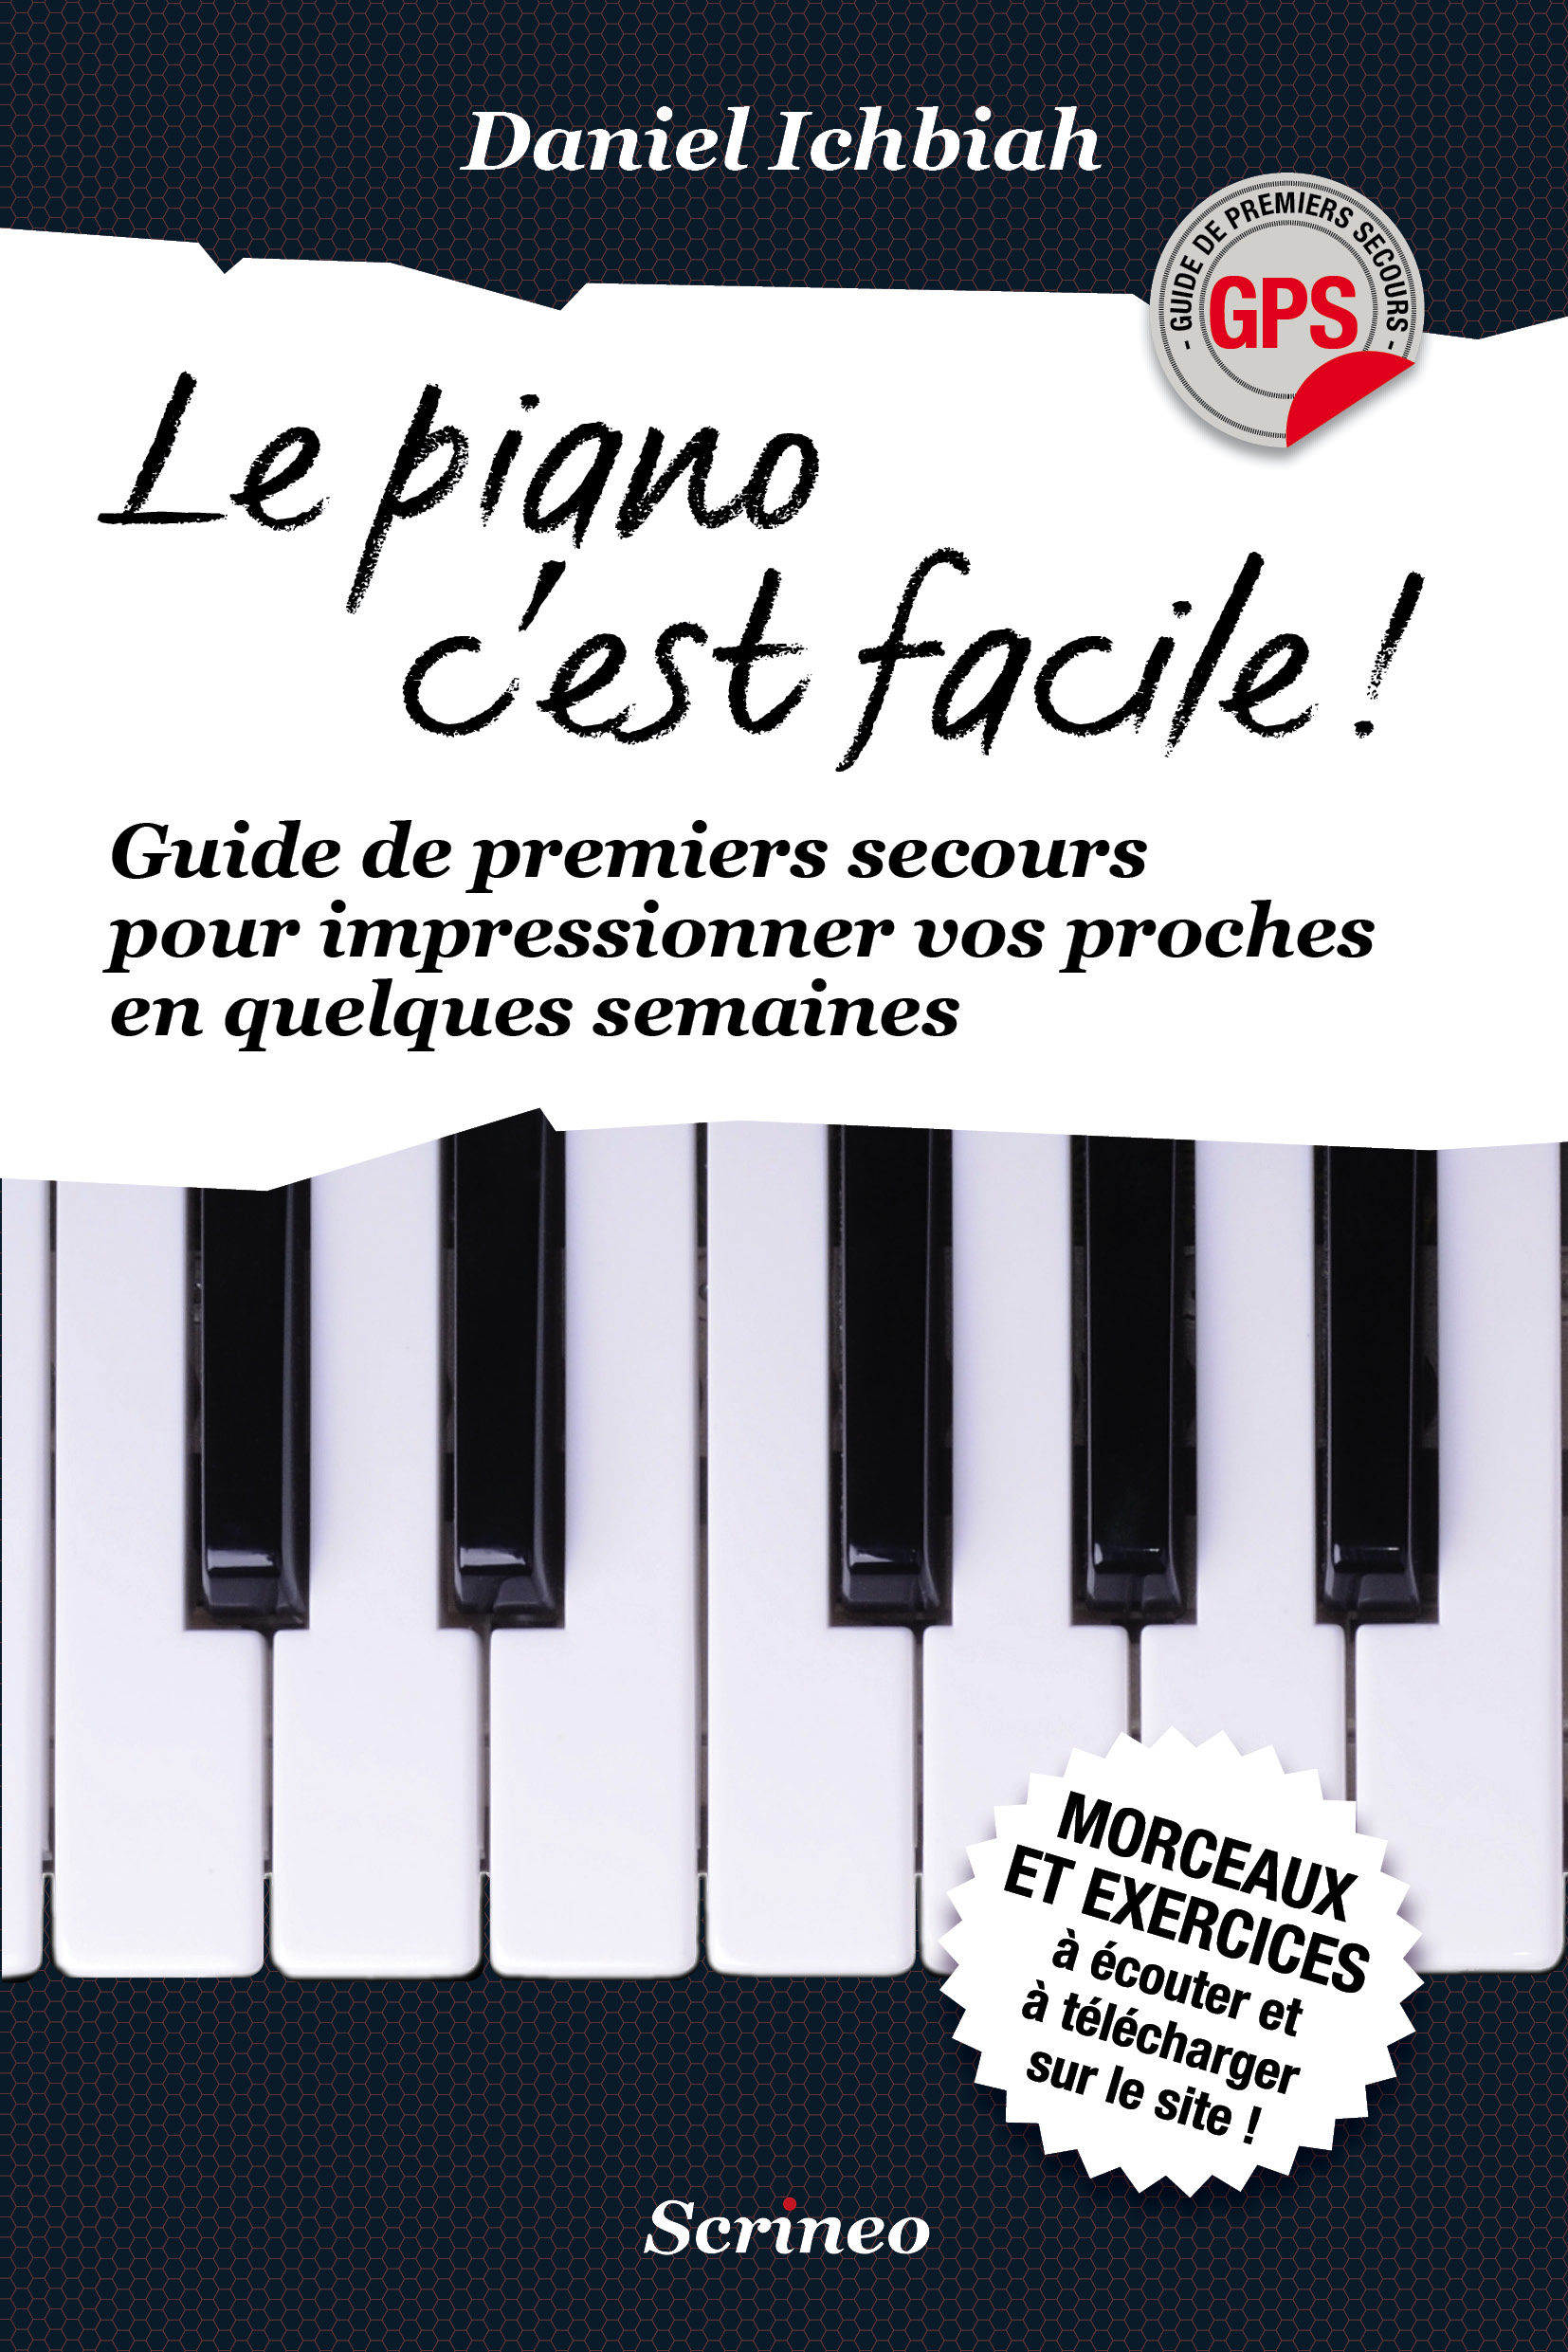 Le piano pour les nuls | Beebs